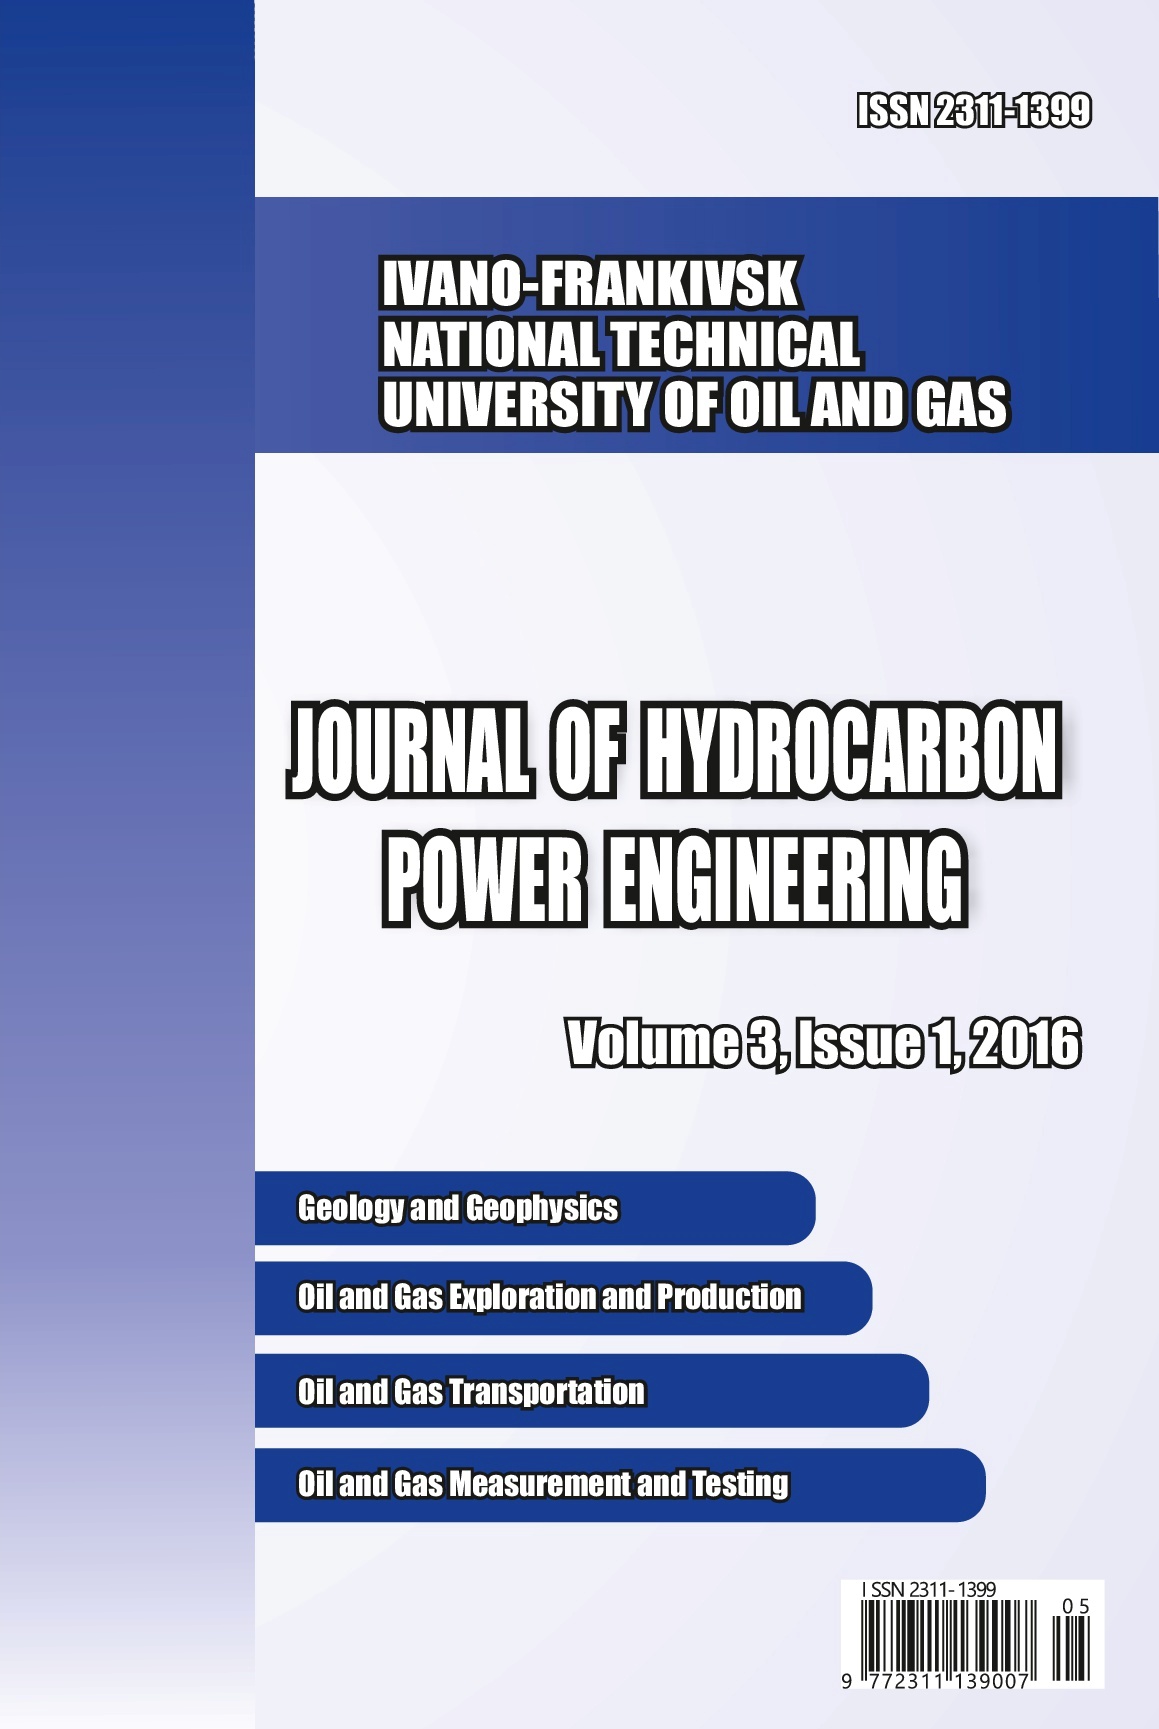 					View Vol. 3 No. 1 (2016): JOURNAL OF HYDROCARBON POWER ENGINEERING
				